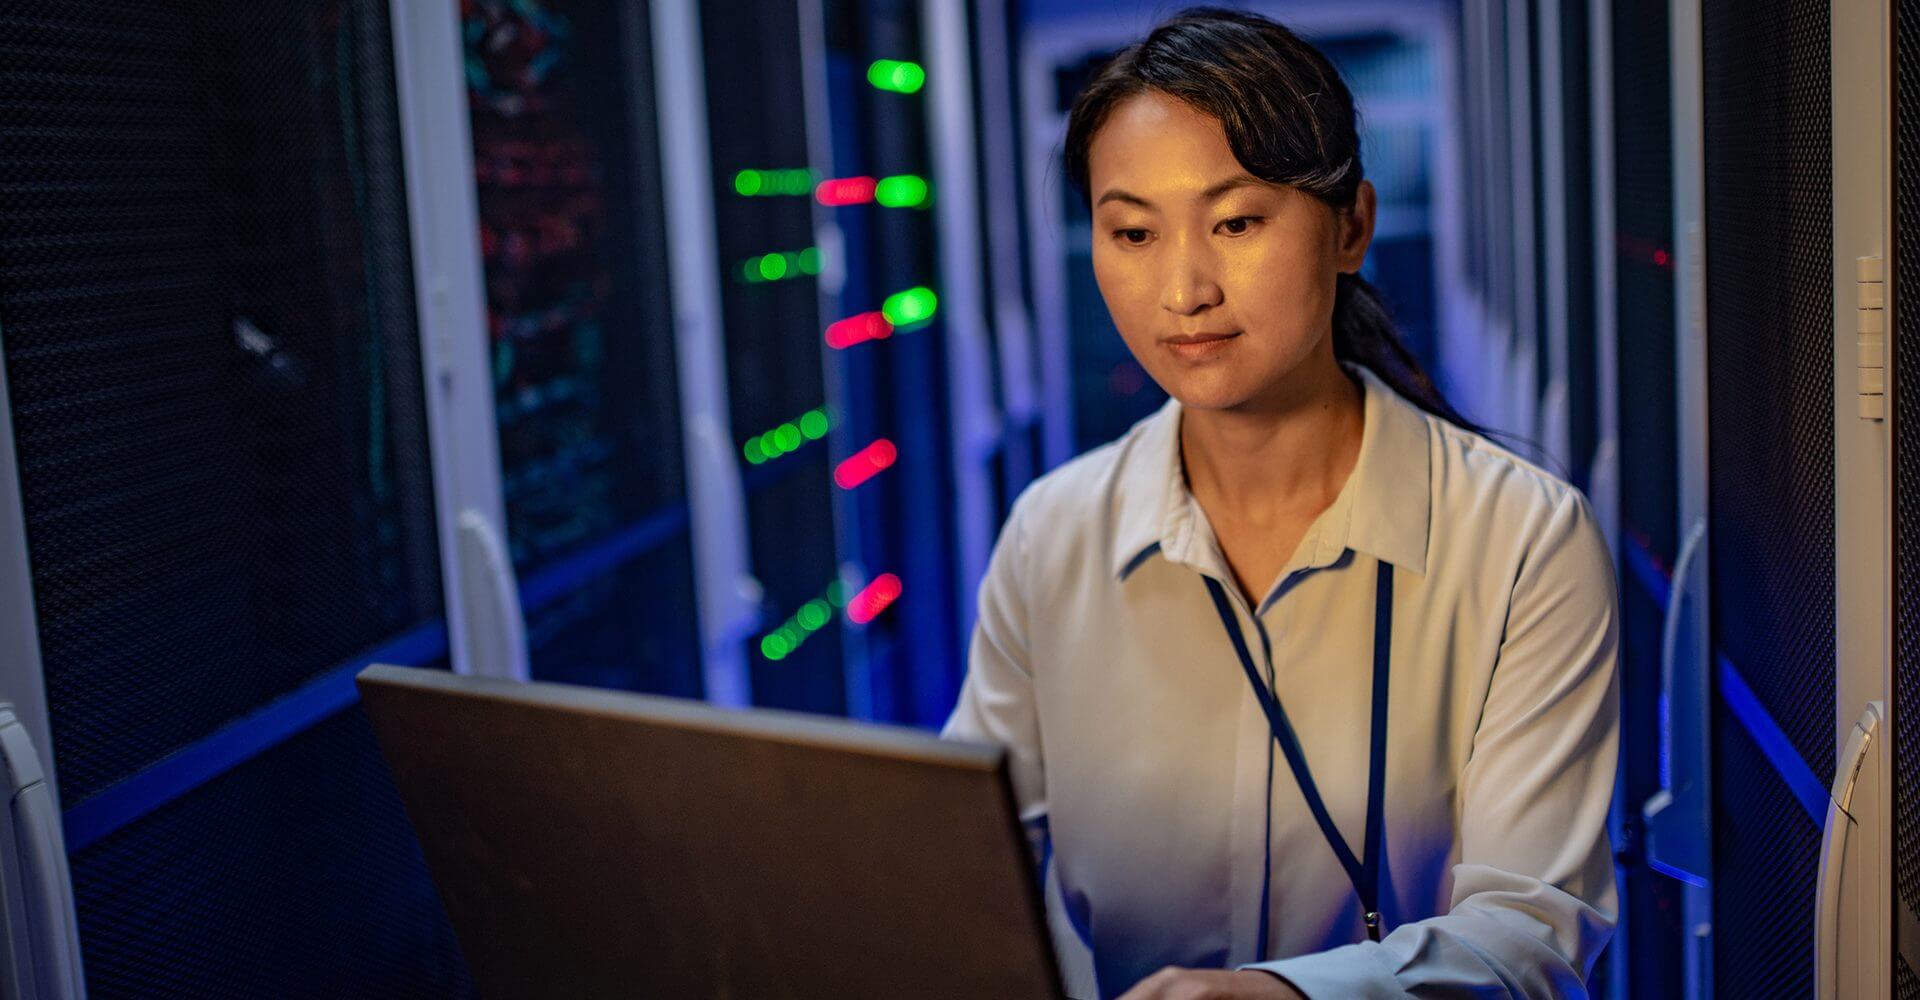 ESG Initiatives in Chinese Data Centers, woman shown working in a data center